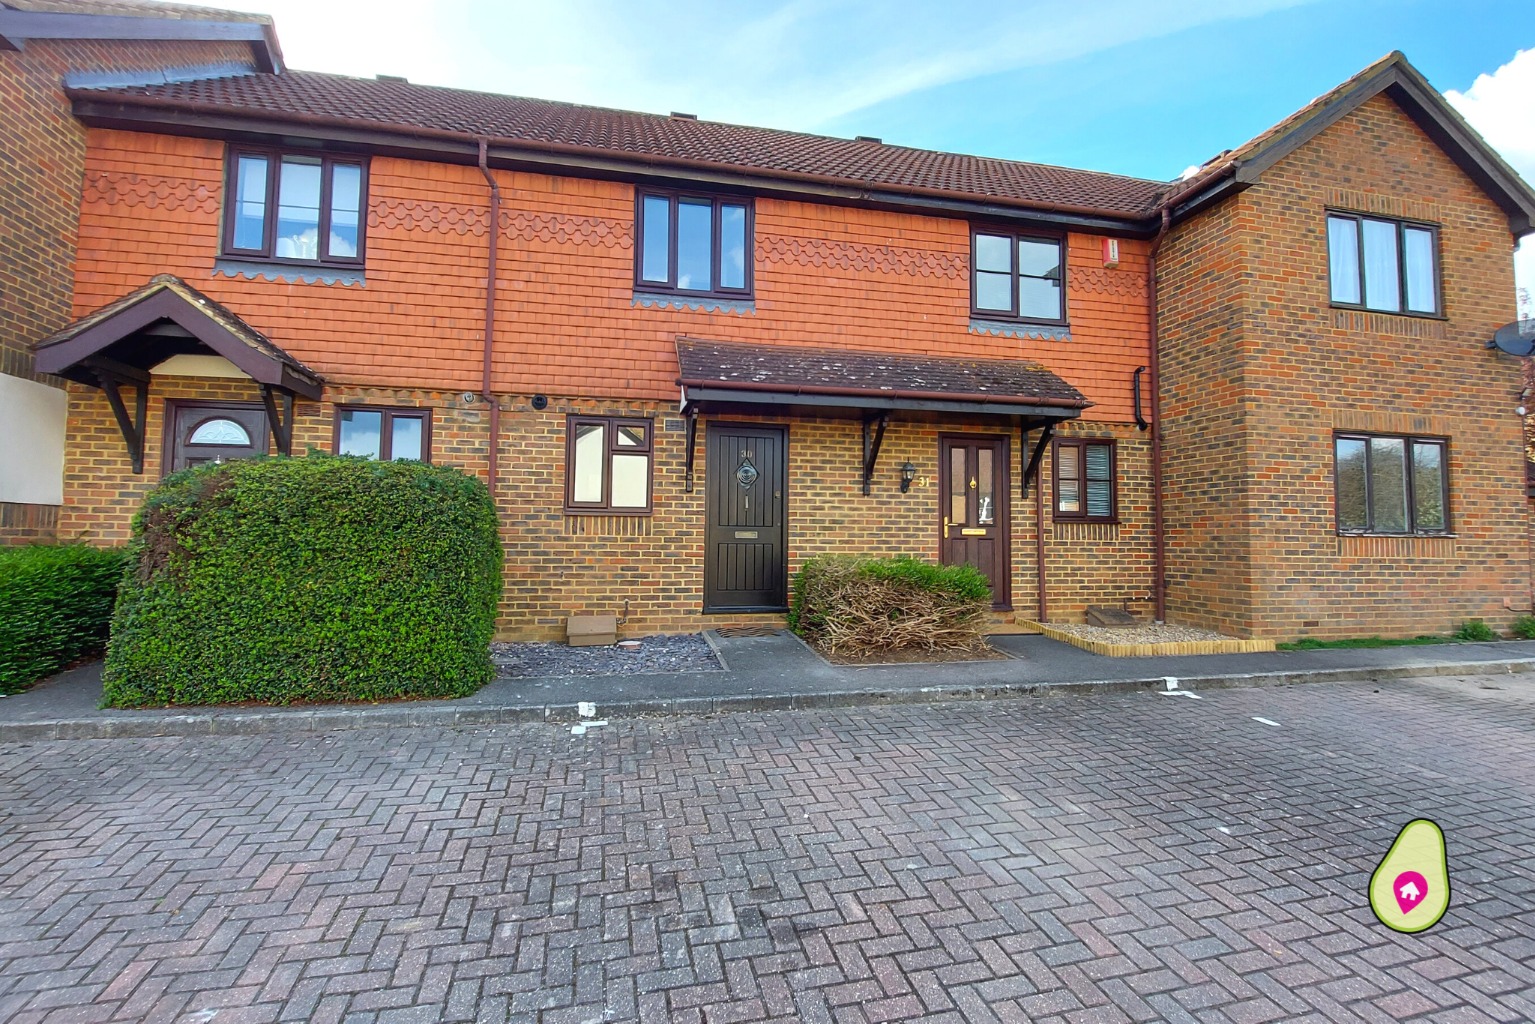 This two bedroom home is in a great location and would make the perfect investment or first time purchase. Having recently had a new kitchen and new bathroom, its ready to move straight into. It also benefits from having two parking spaces.